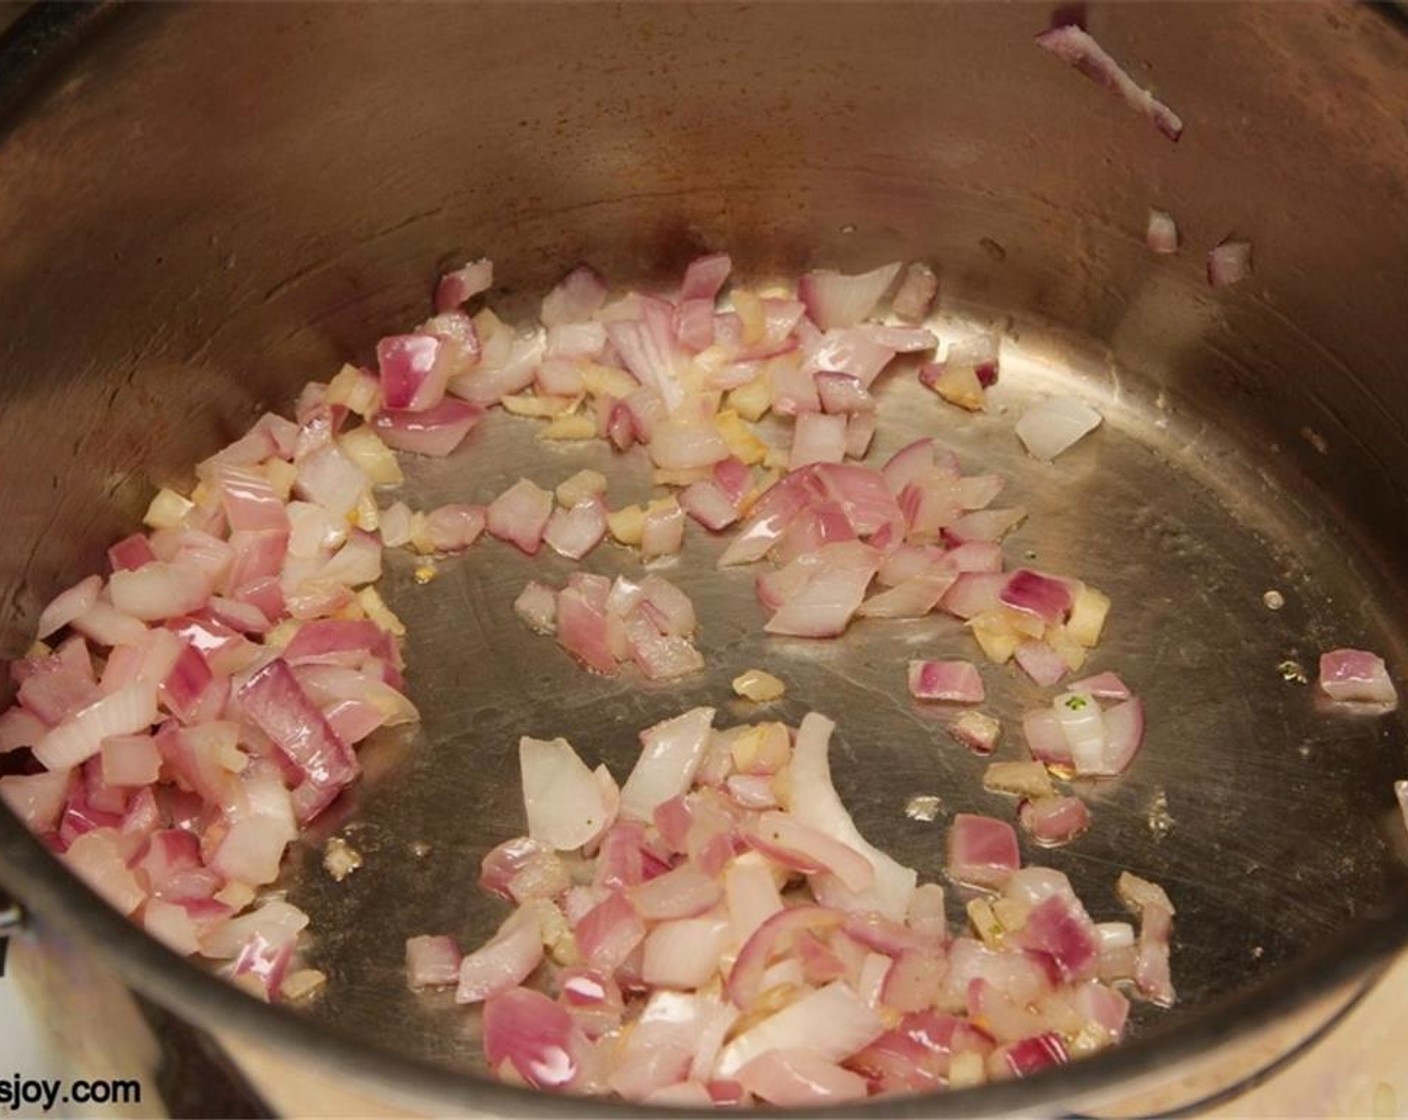 step 1 Heat the Olive Oil (1/2 Tbsp) in a pot and add the Onion (3/4 cup) and Garlic (2 cloves). Sauté until the onions are cooked.